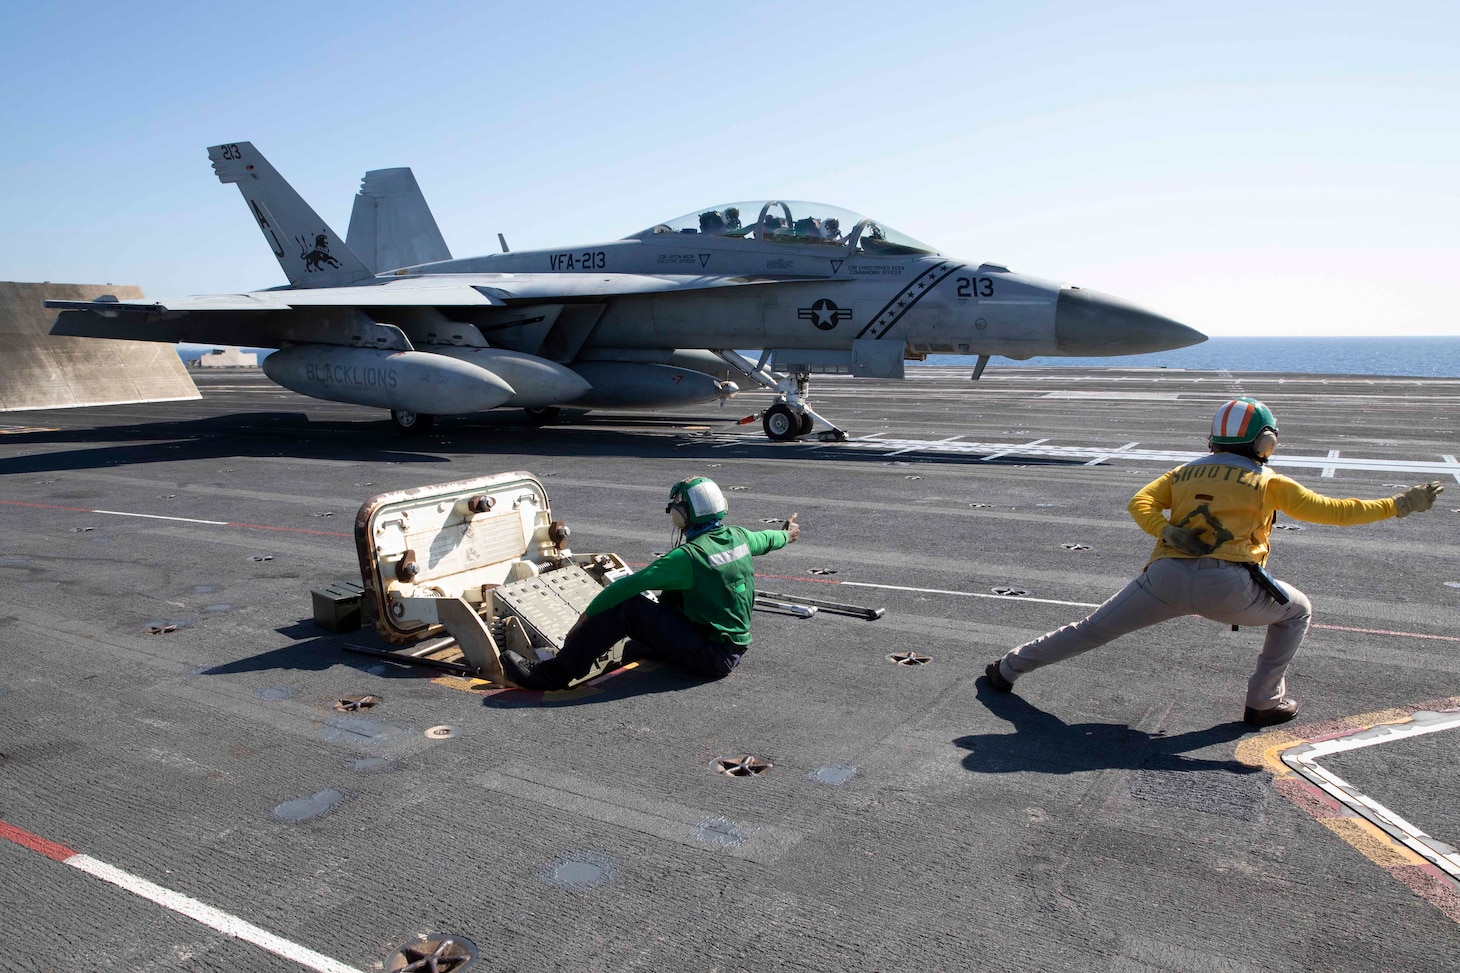 An F/A-18F Super Hornet, attached to the "Blacklions" of Strike Fighter Squadron (VFA) 213 prepares to launch from the flight deck of the world’s largest aircraft carrier USS Gerald R. Ford (CVN 78) in the Adriatic Sea, July, 8, 2023. Gerald R. Ford is the U.S. Navy's newest and most advanced aircraft carrier, representing a generational leap in the U.S. Navy's capacity to project power on a global scale. The Gerald R. Ford Carrier Strike Group is on a scheduled deployment in the U.S. Naval Forces Europe area of operations, employed by U.S. Sixth Fleet to defend U.S., allied, and partner interests. (U.S. Navy photo by Mass Communication Specialist 1st Class William Spears)